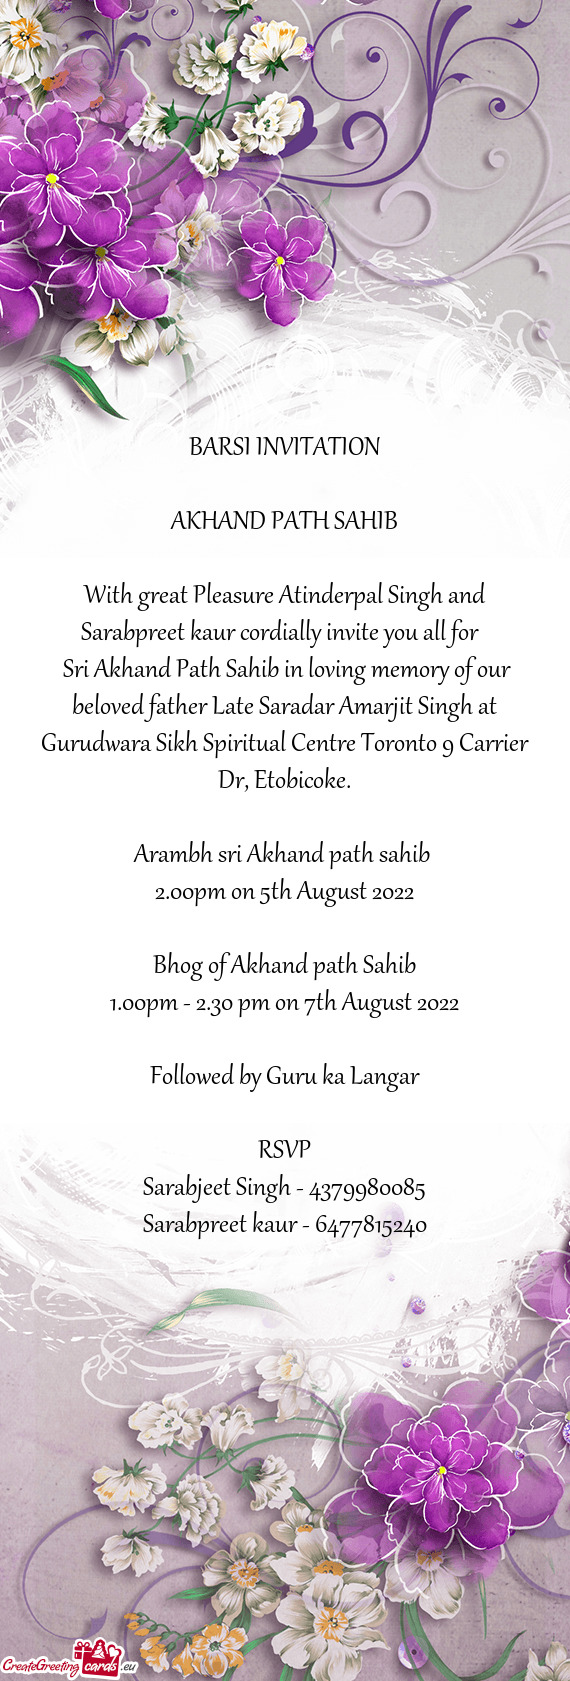 With great Pleasure Atinderpal Singh and Sarabpreet kaur cordially invite you all for